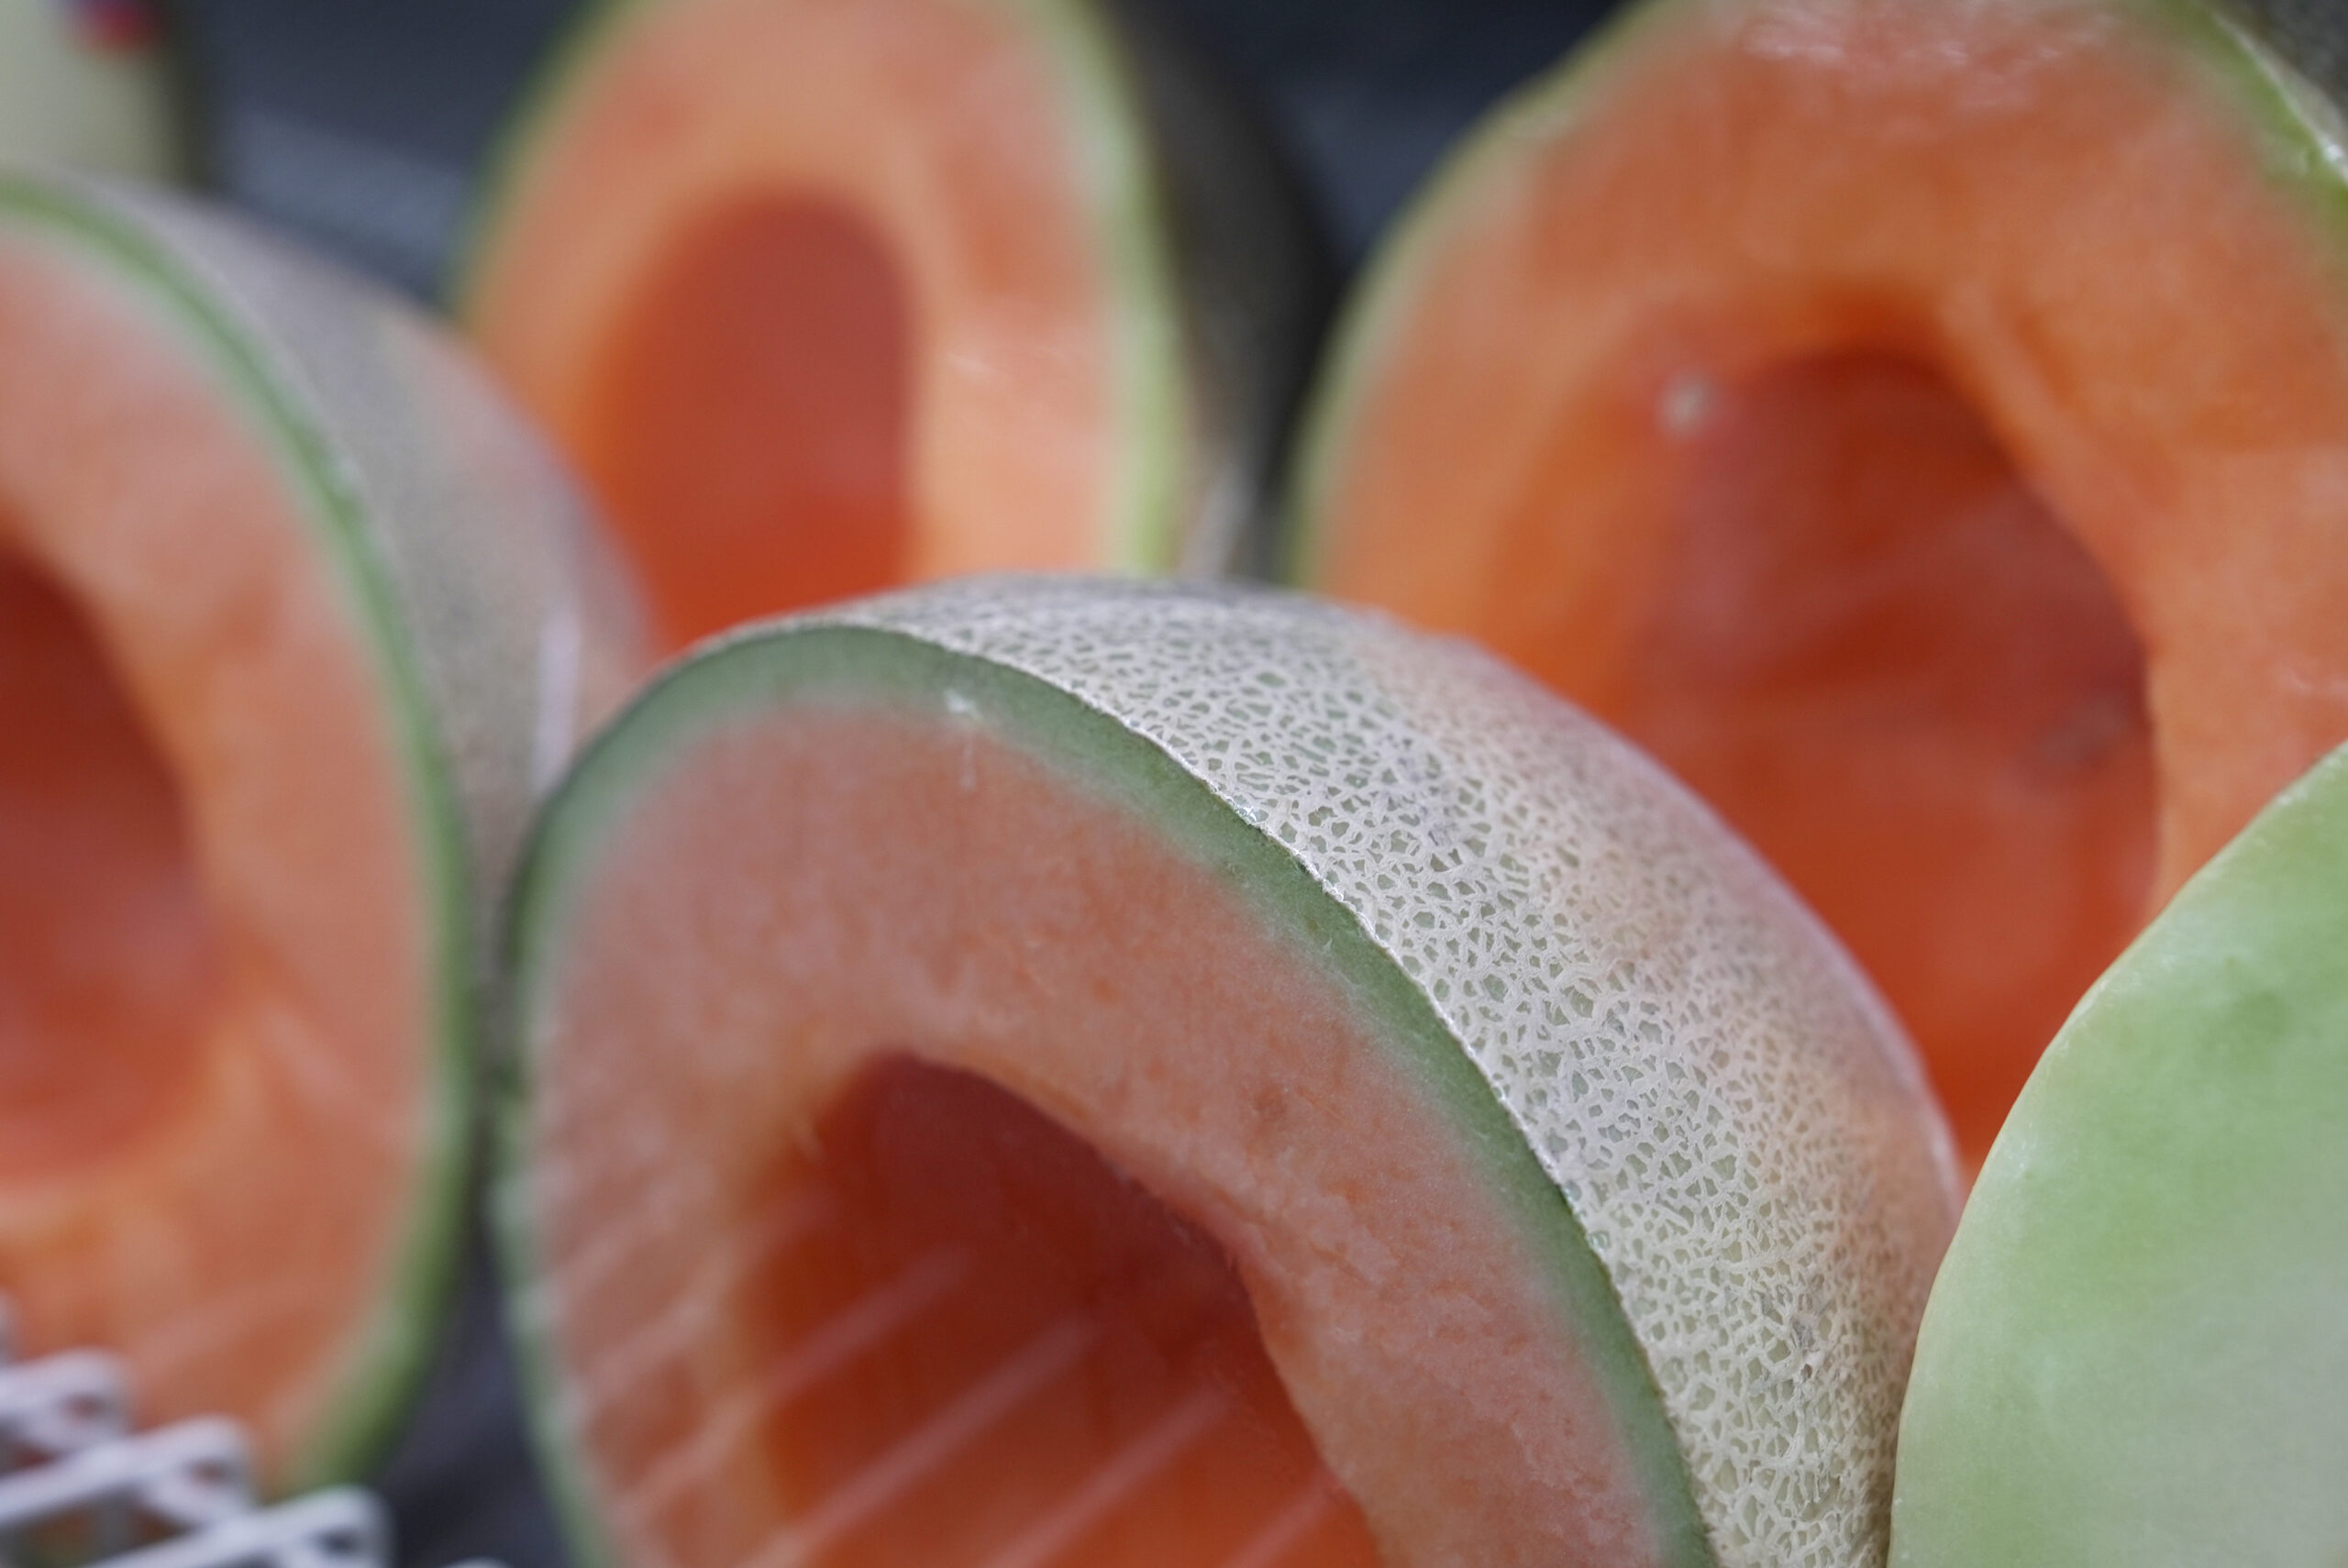 Cantaloupe halves are displayed for sale at a supermarket in New York on Tuesday, Dec. 12, 2023. In...